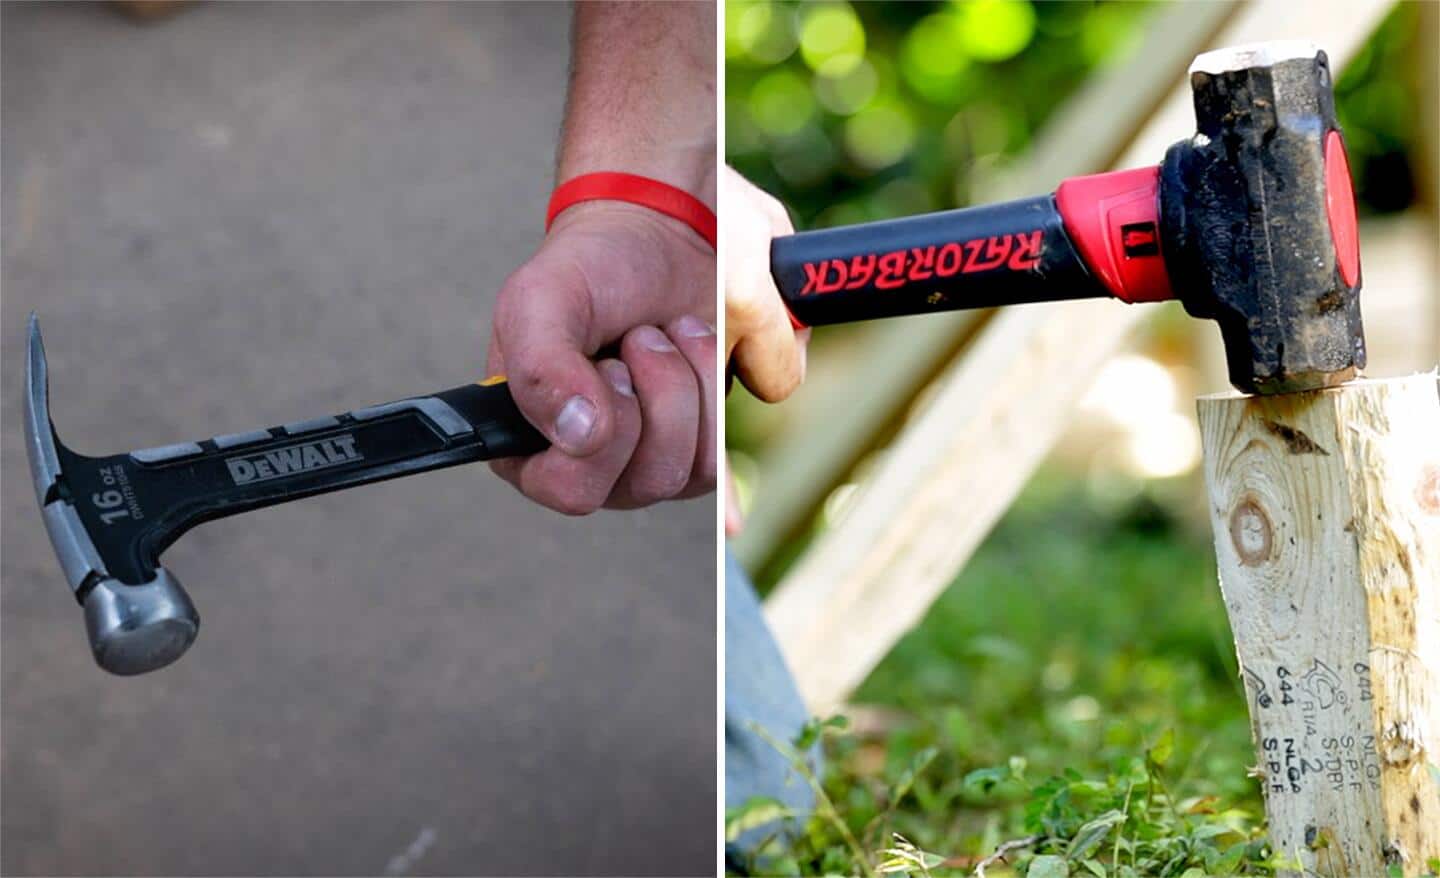 Tool School: 25 tools every homeowner should own - THE HOMESTUD